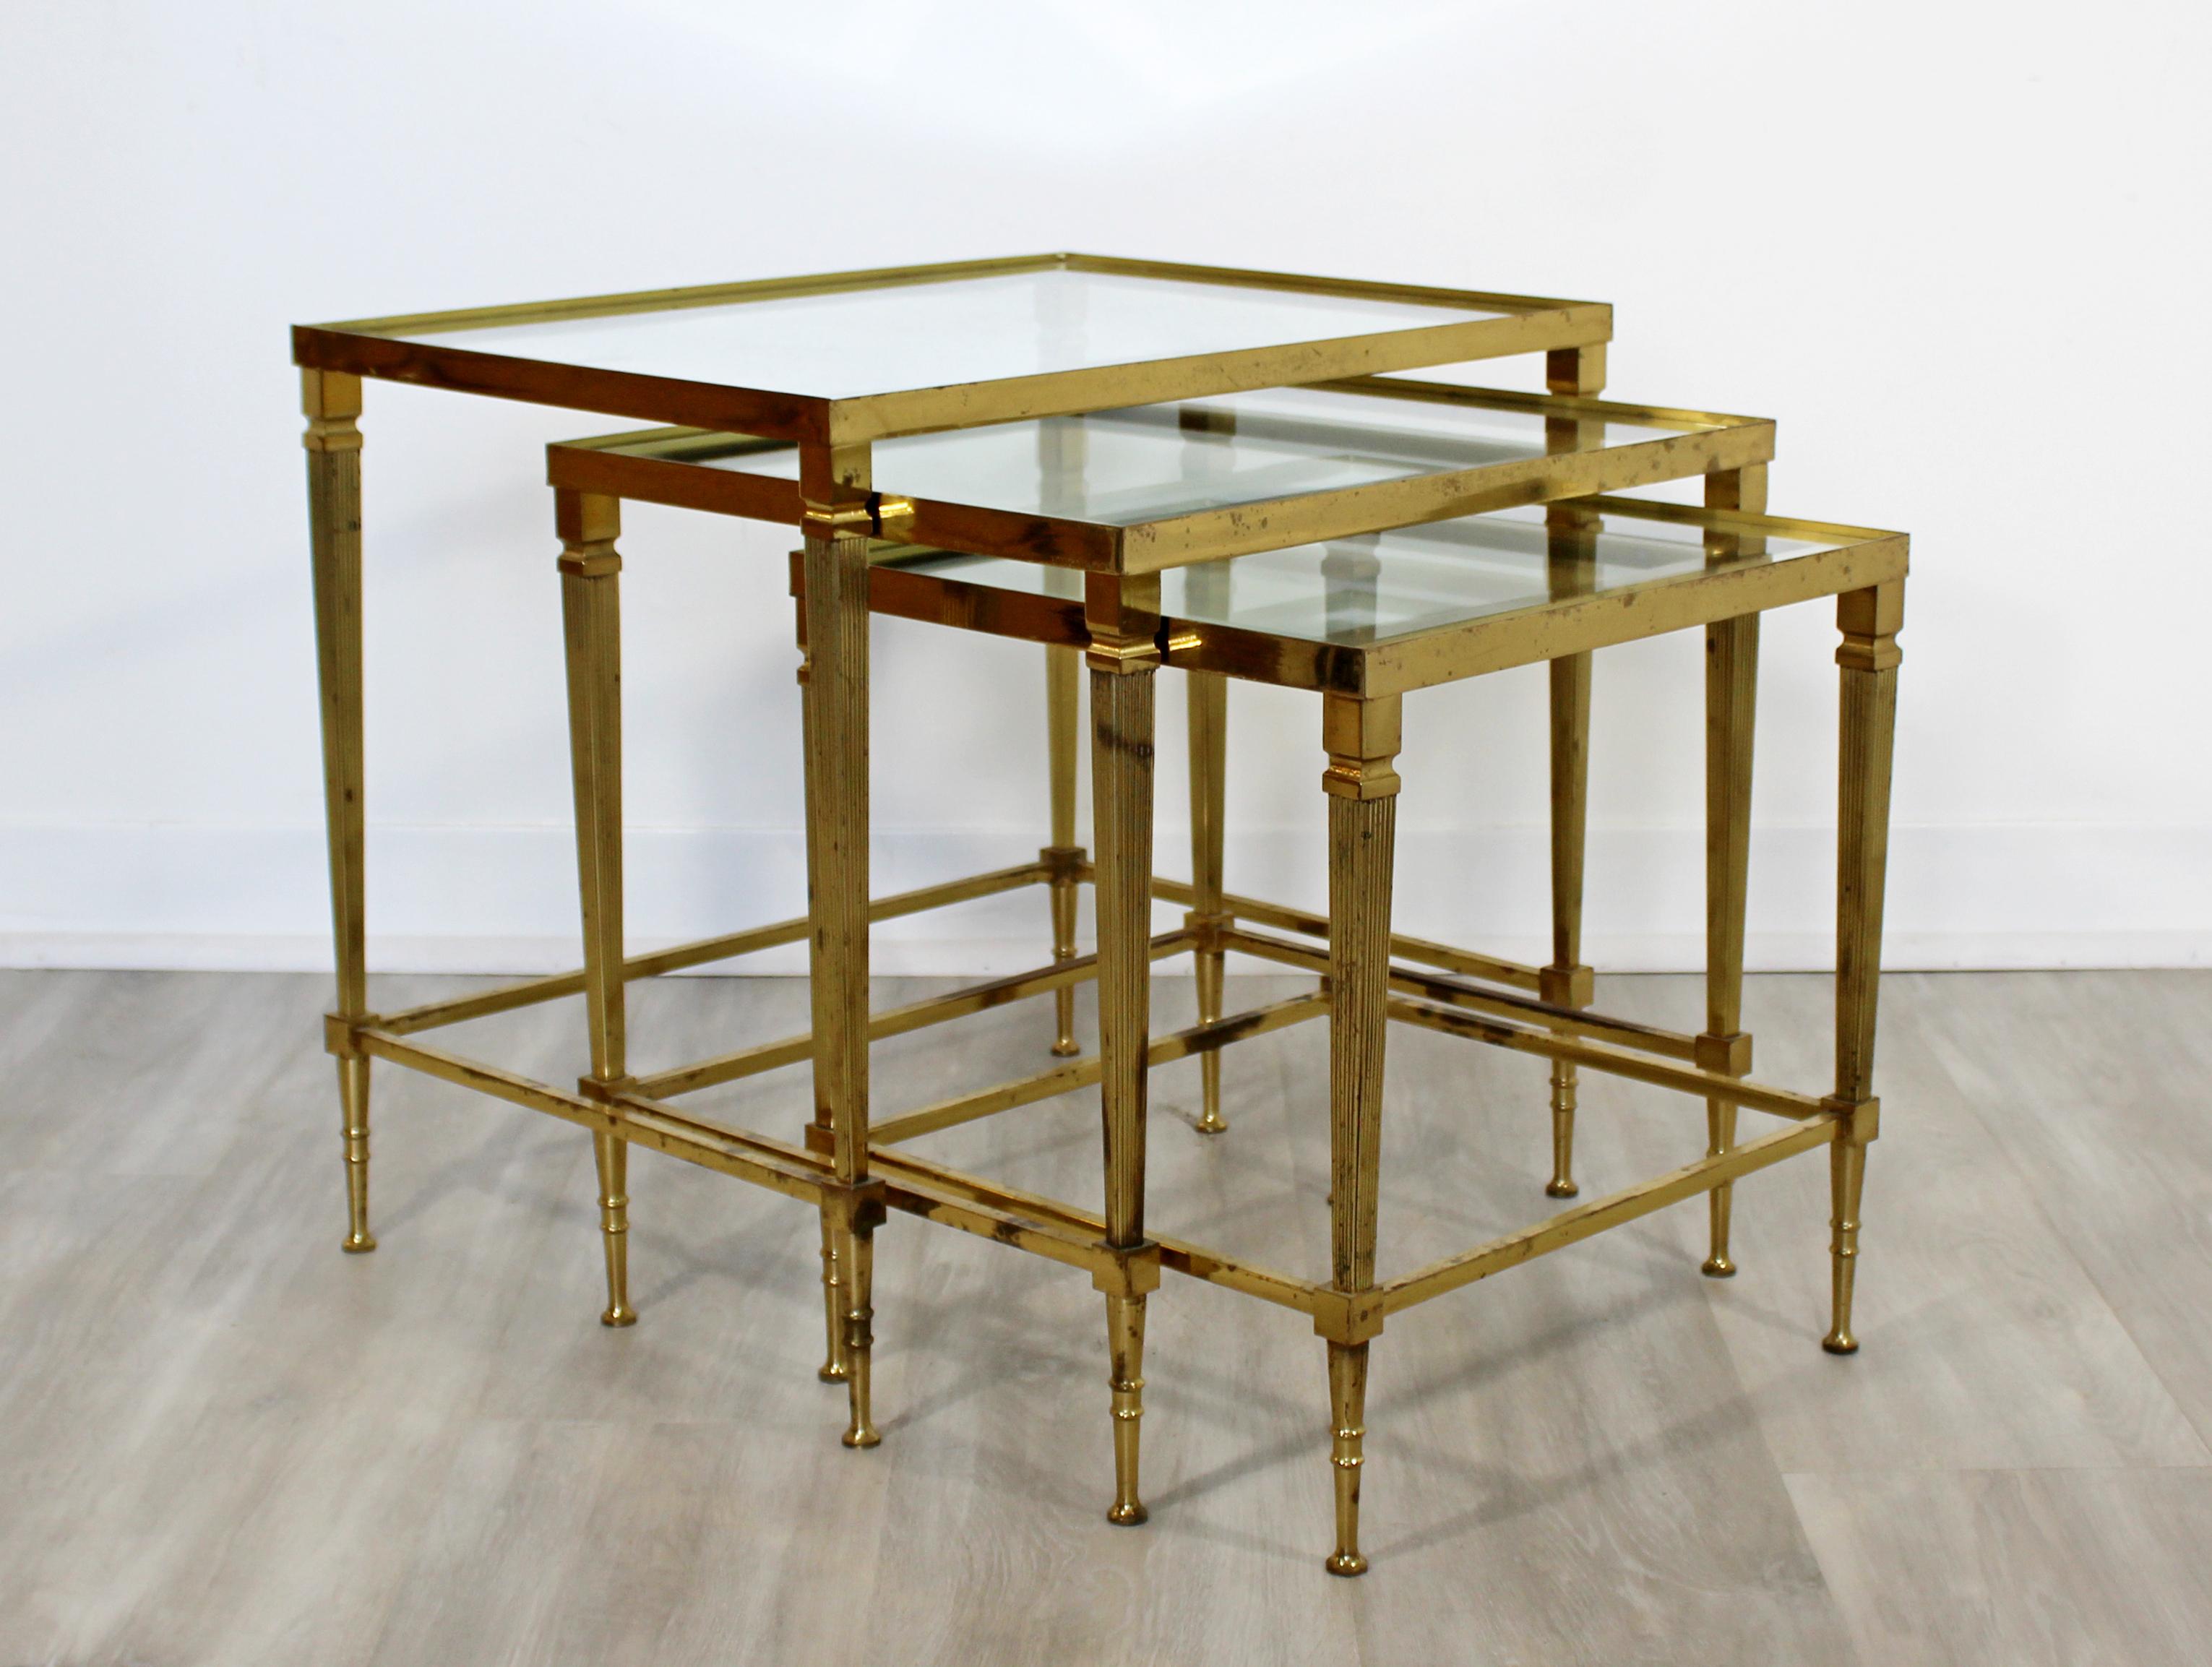 For your consideration is a fantastic set of three stacked nesting tables, made of brass and with mirrored glass inserts, circa 1950s. In good vintage condition. The dimensions of the three together are 20.25